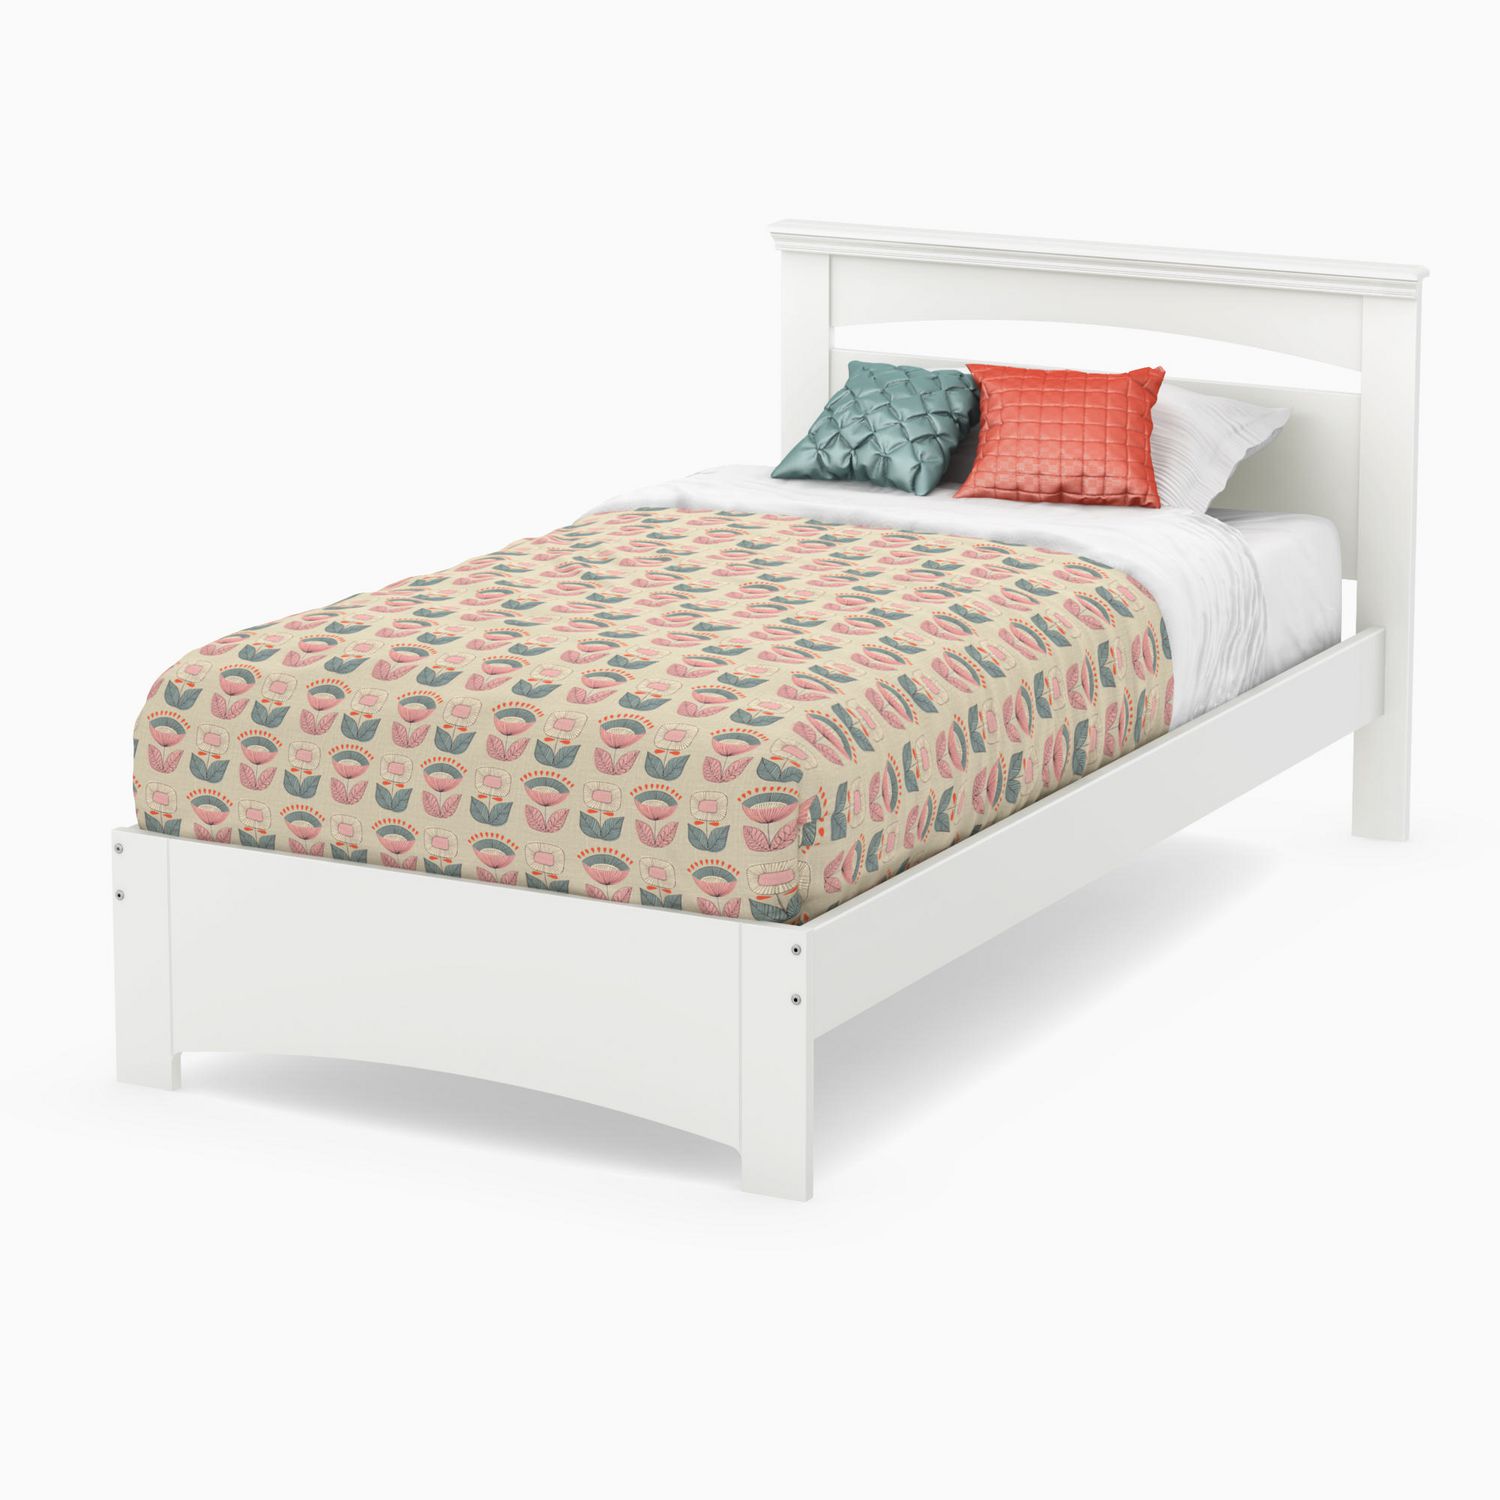 South S Smart Basic Twin Bed Set, Inexpensive Twin Bed Frame